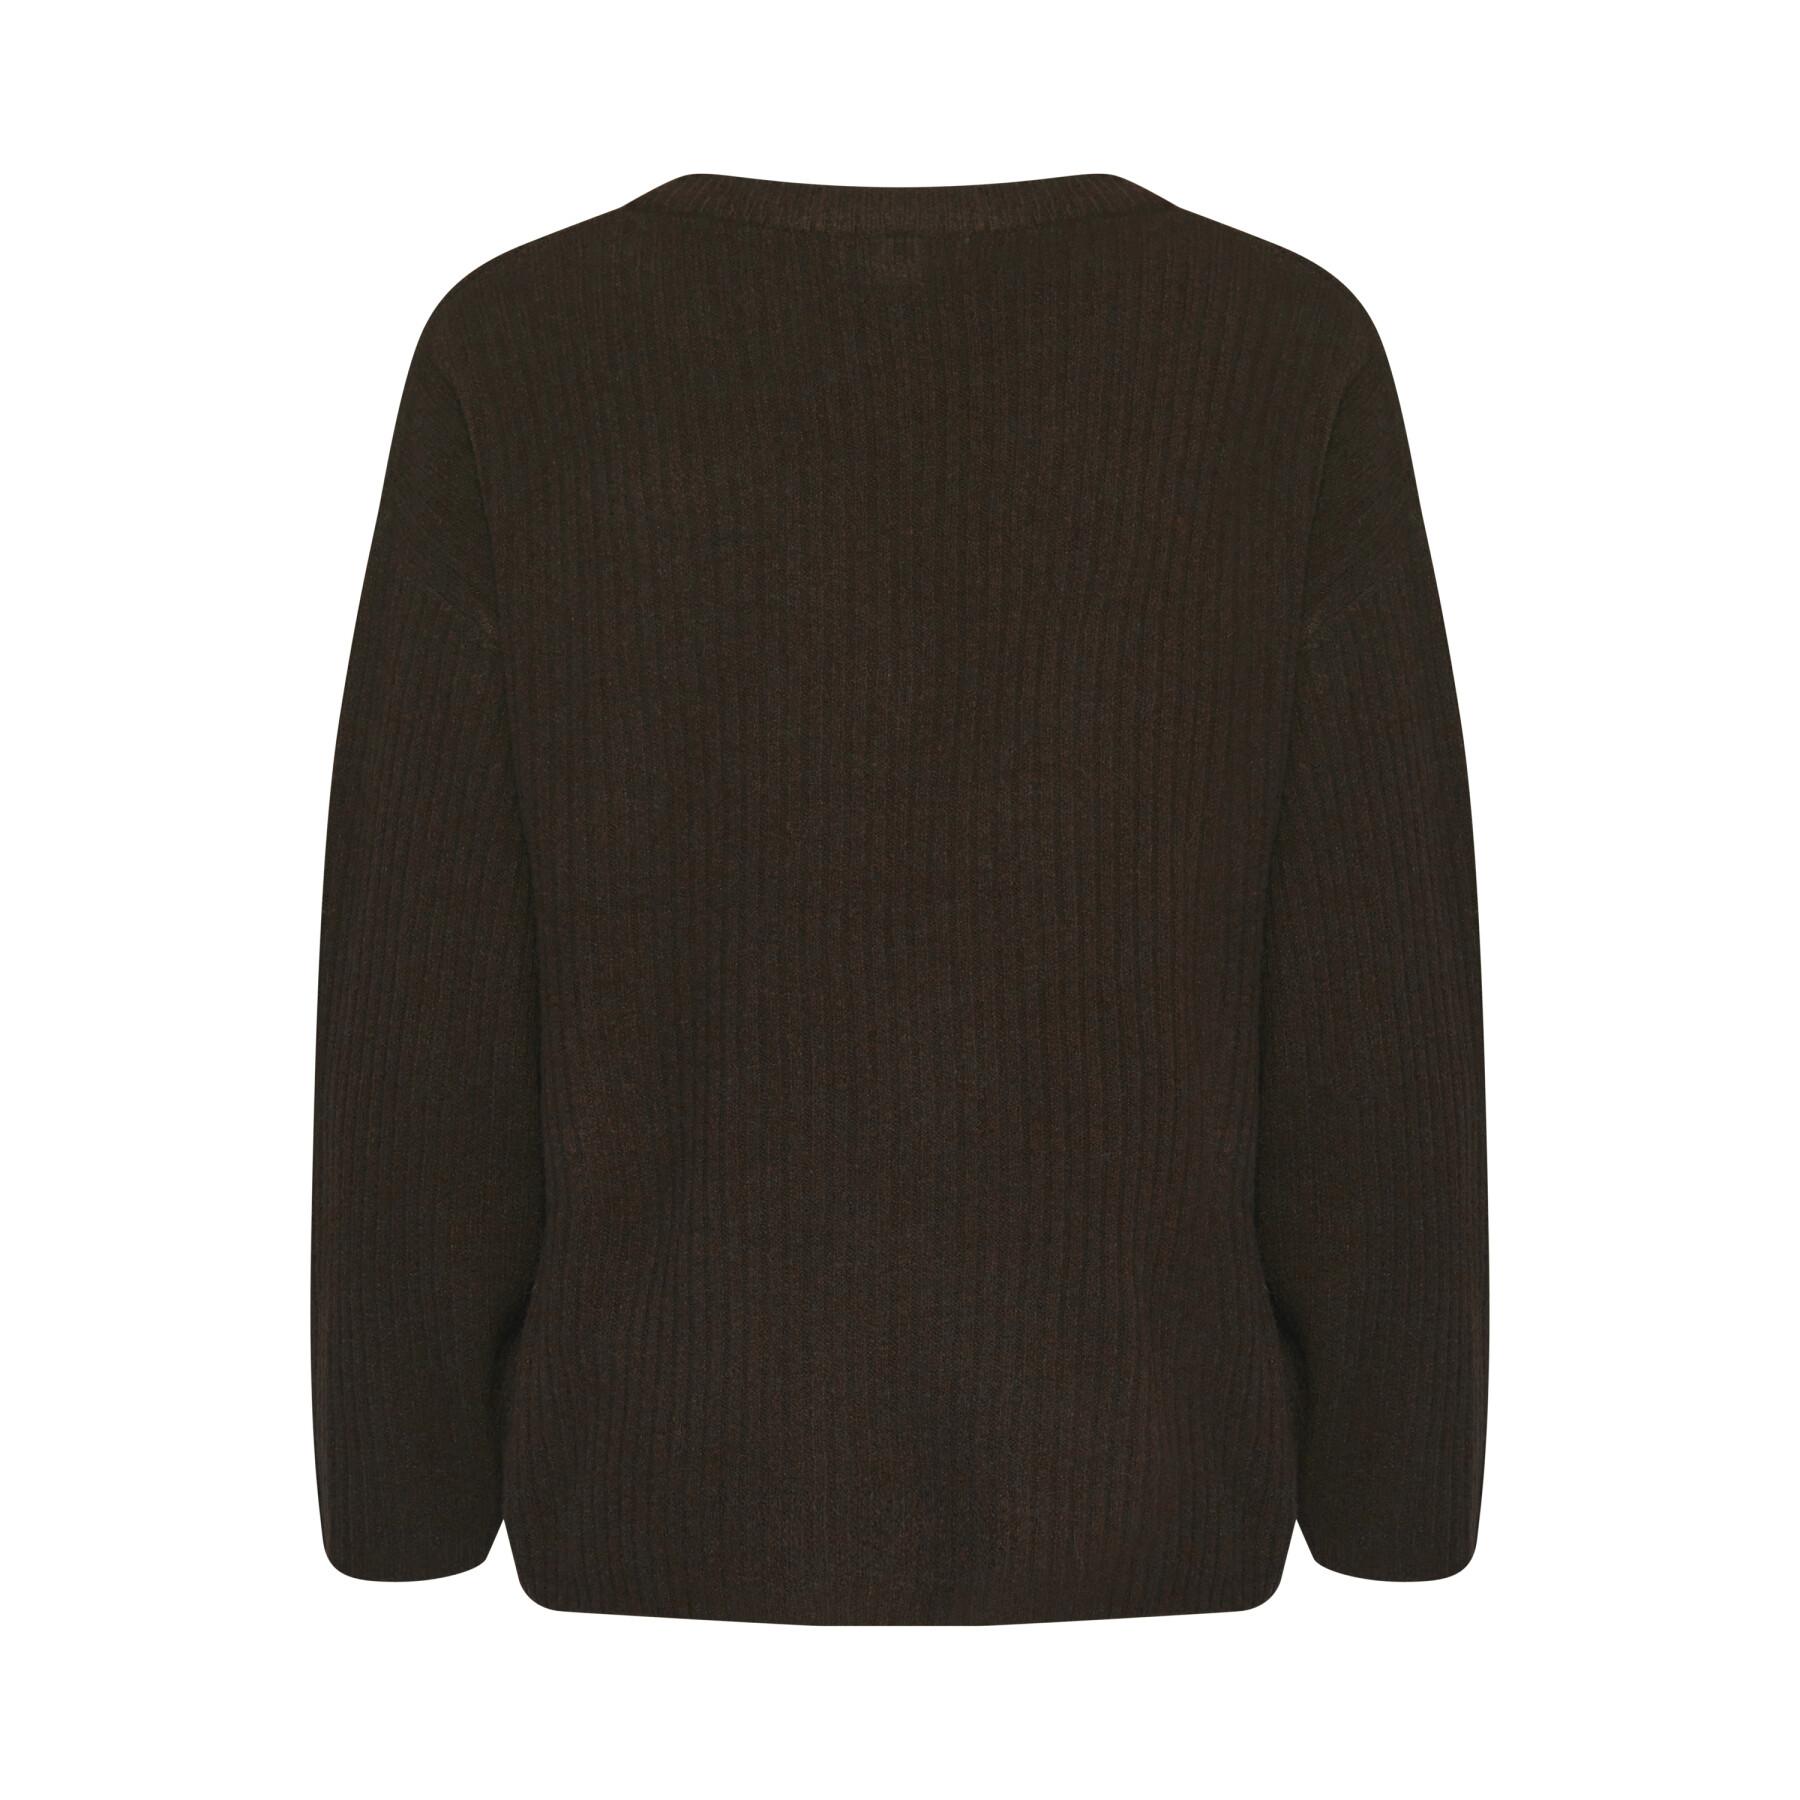 Women's v-neck sweater b.young Onema